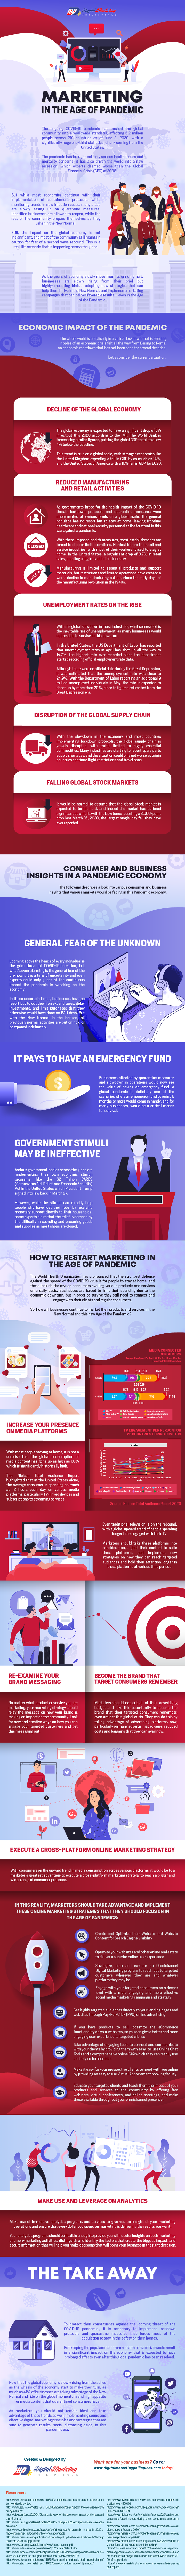 Marketing in the Age of Pandemic (Infographic) - An Infographic from Digital Marketing Philippines